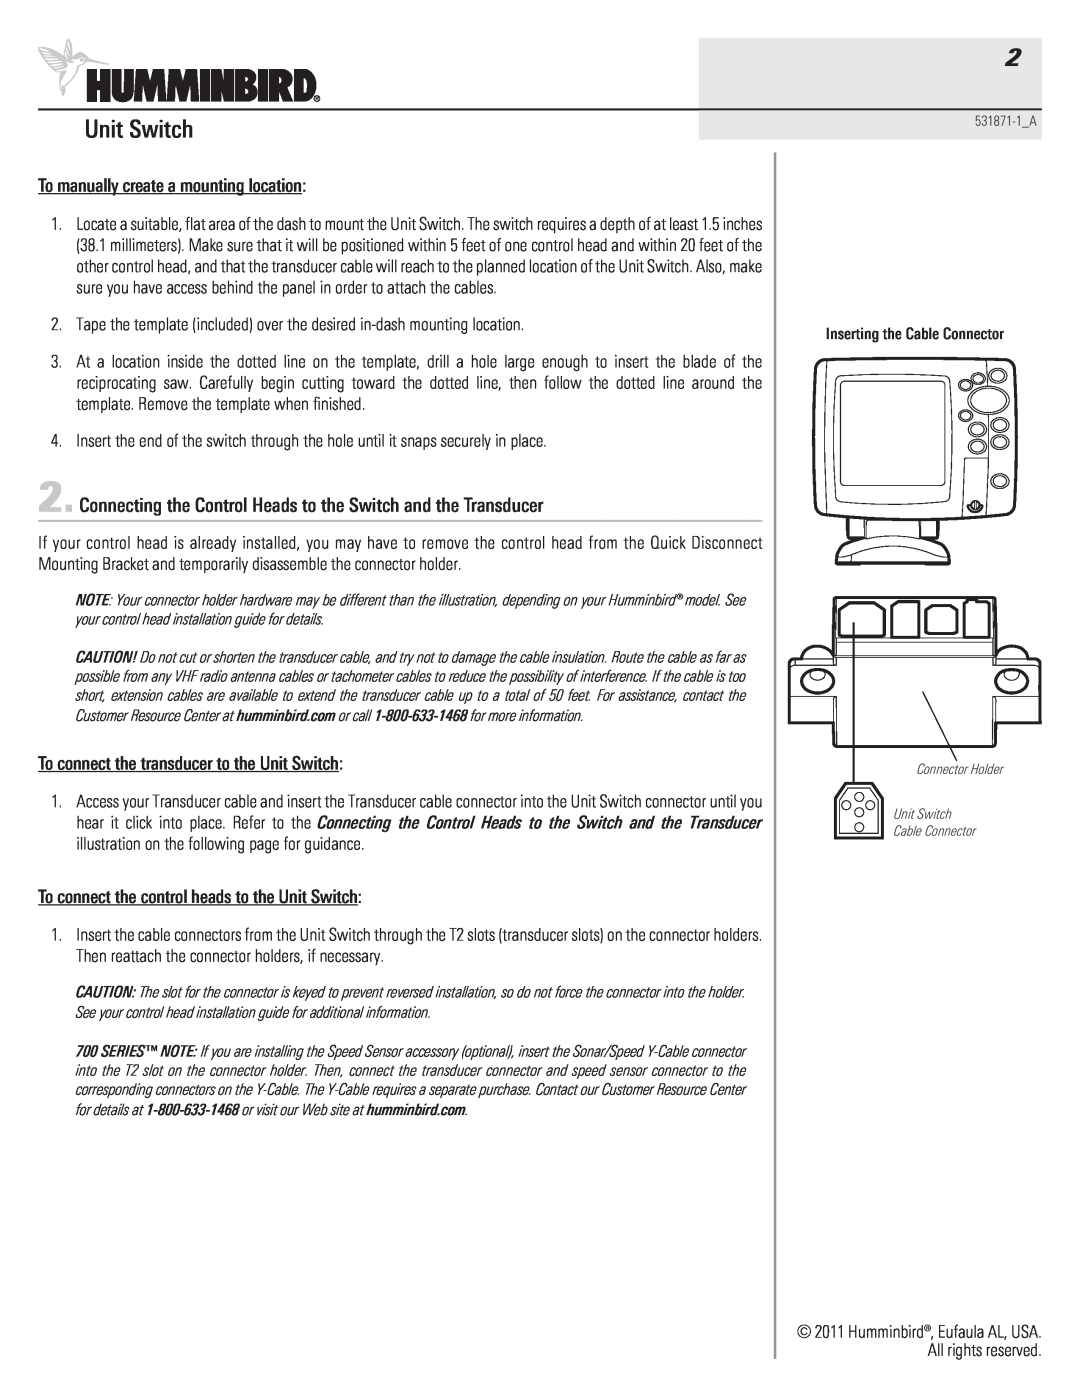 Humminbird 531871-1_A warranty Connecting the Control Heads to the Switch and the Transducer, Unit Switch 